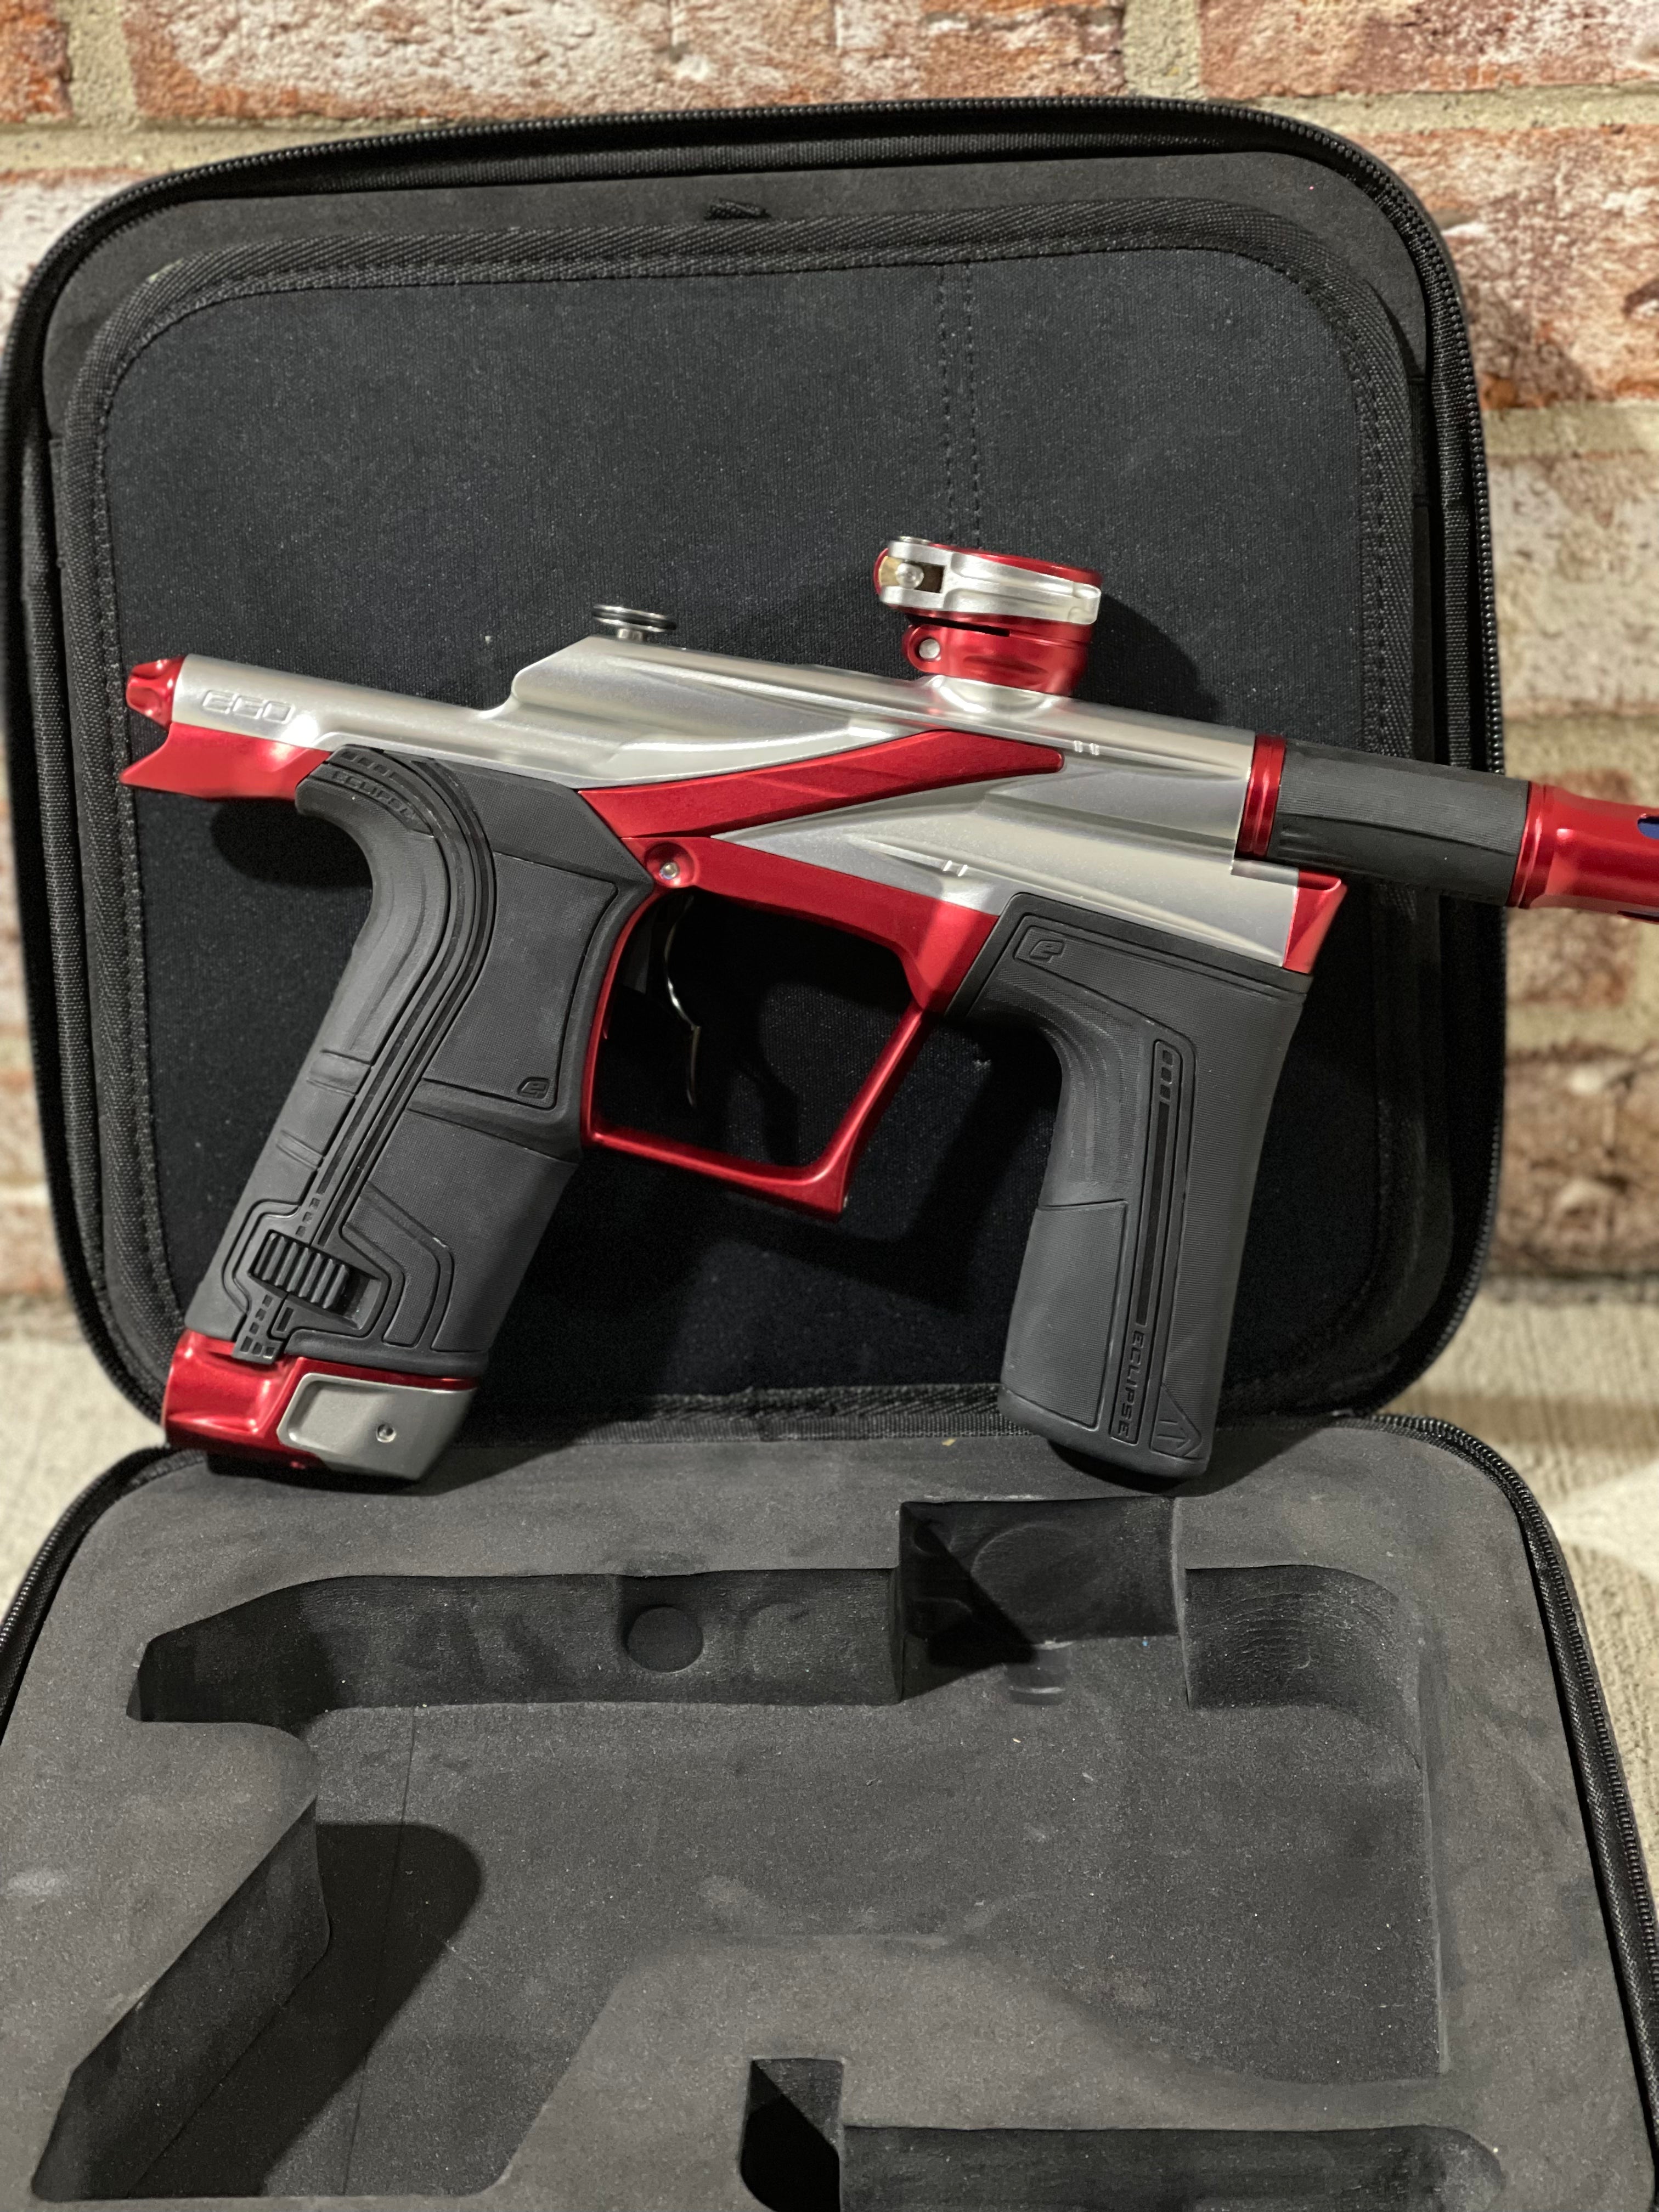 Used Planet Eclipse LV2 Paintball Gun - Black/Red – Punishers